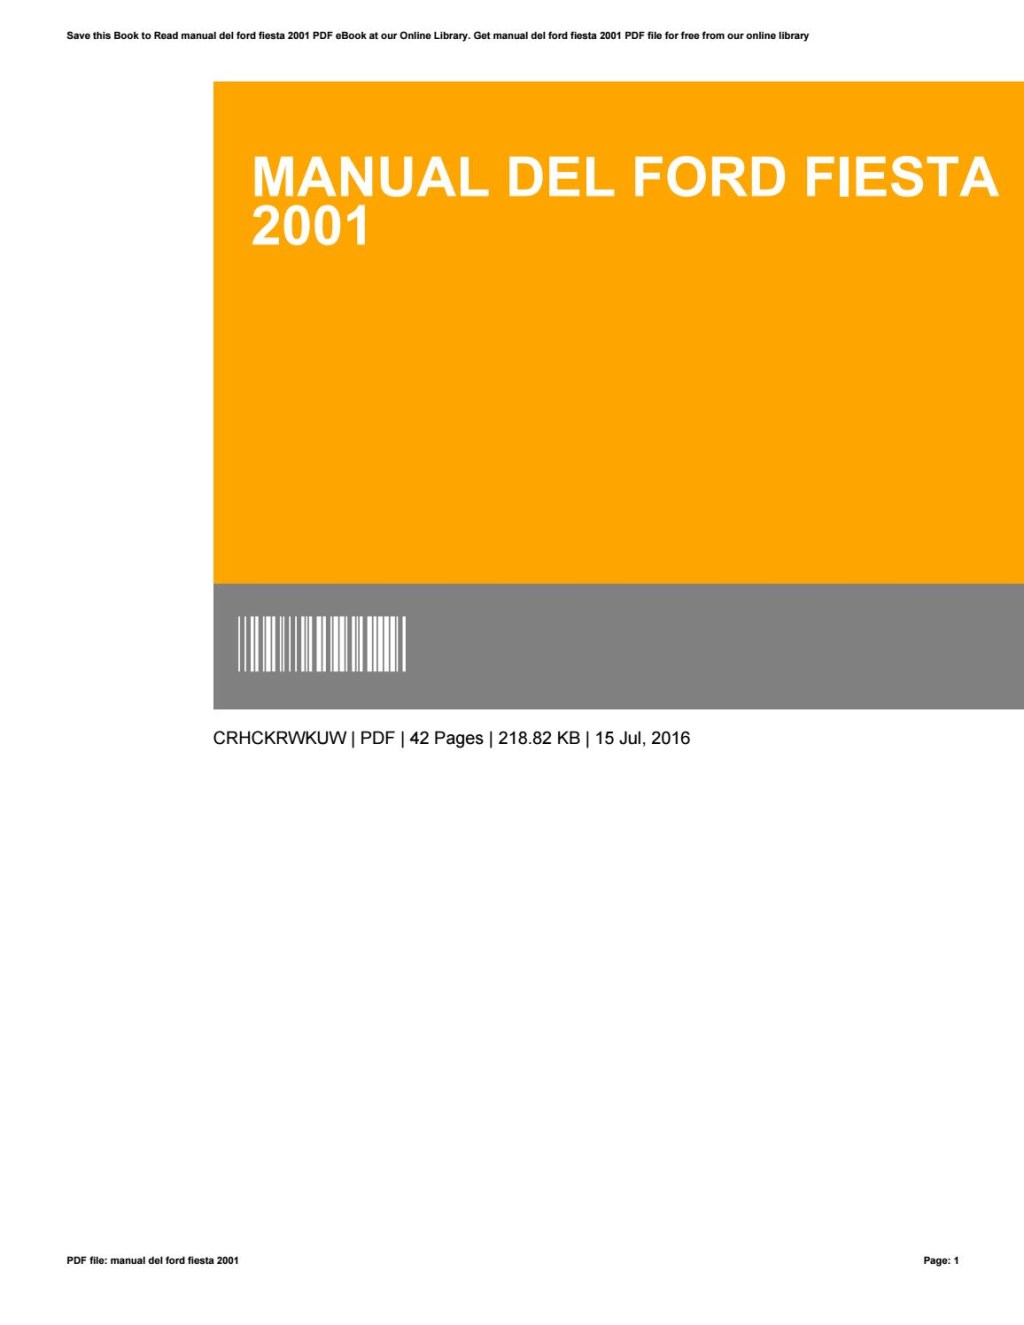 Picture of: Manual del ford fiesta  by JulieCopeland – Issuu